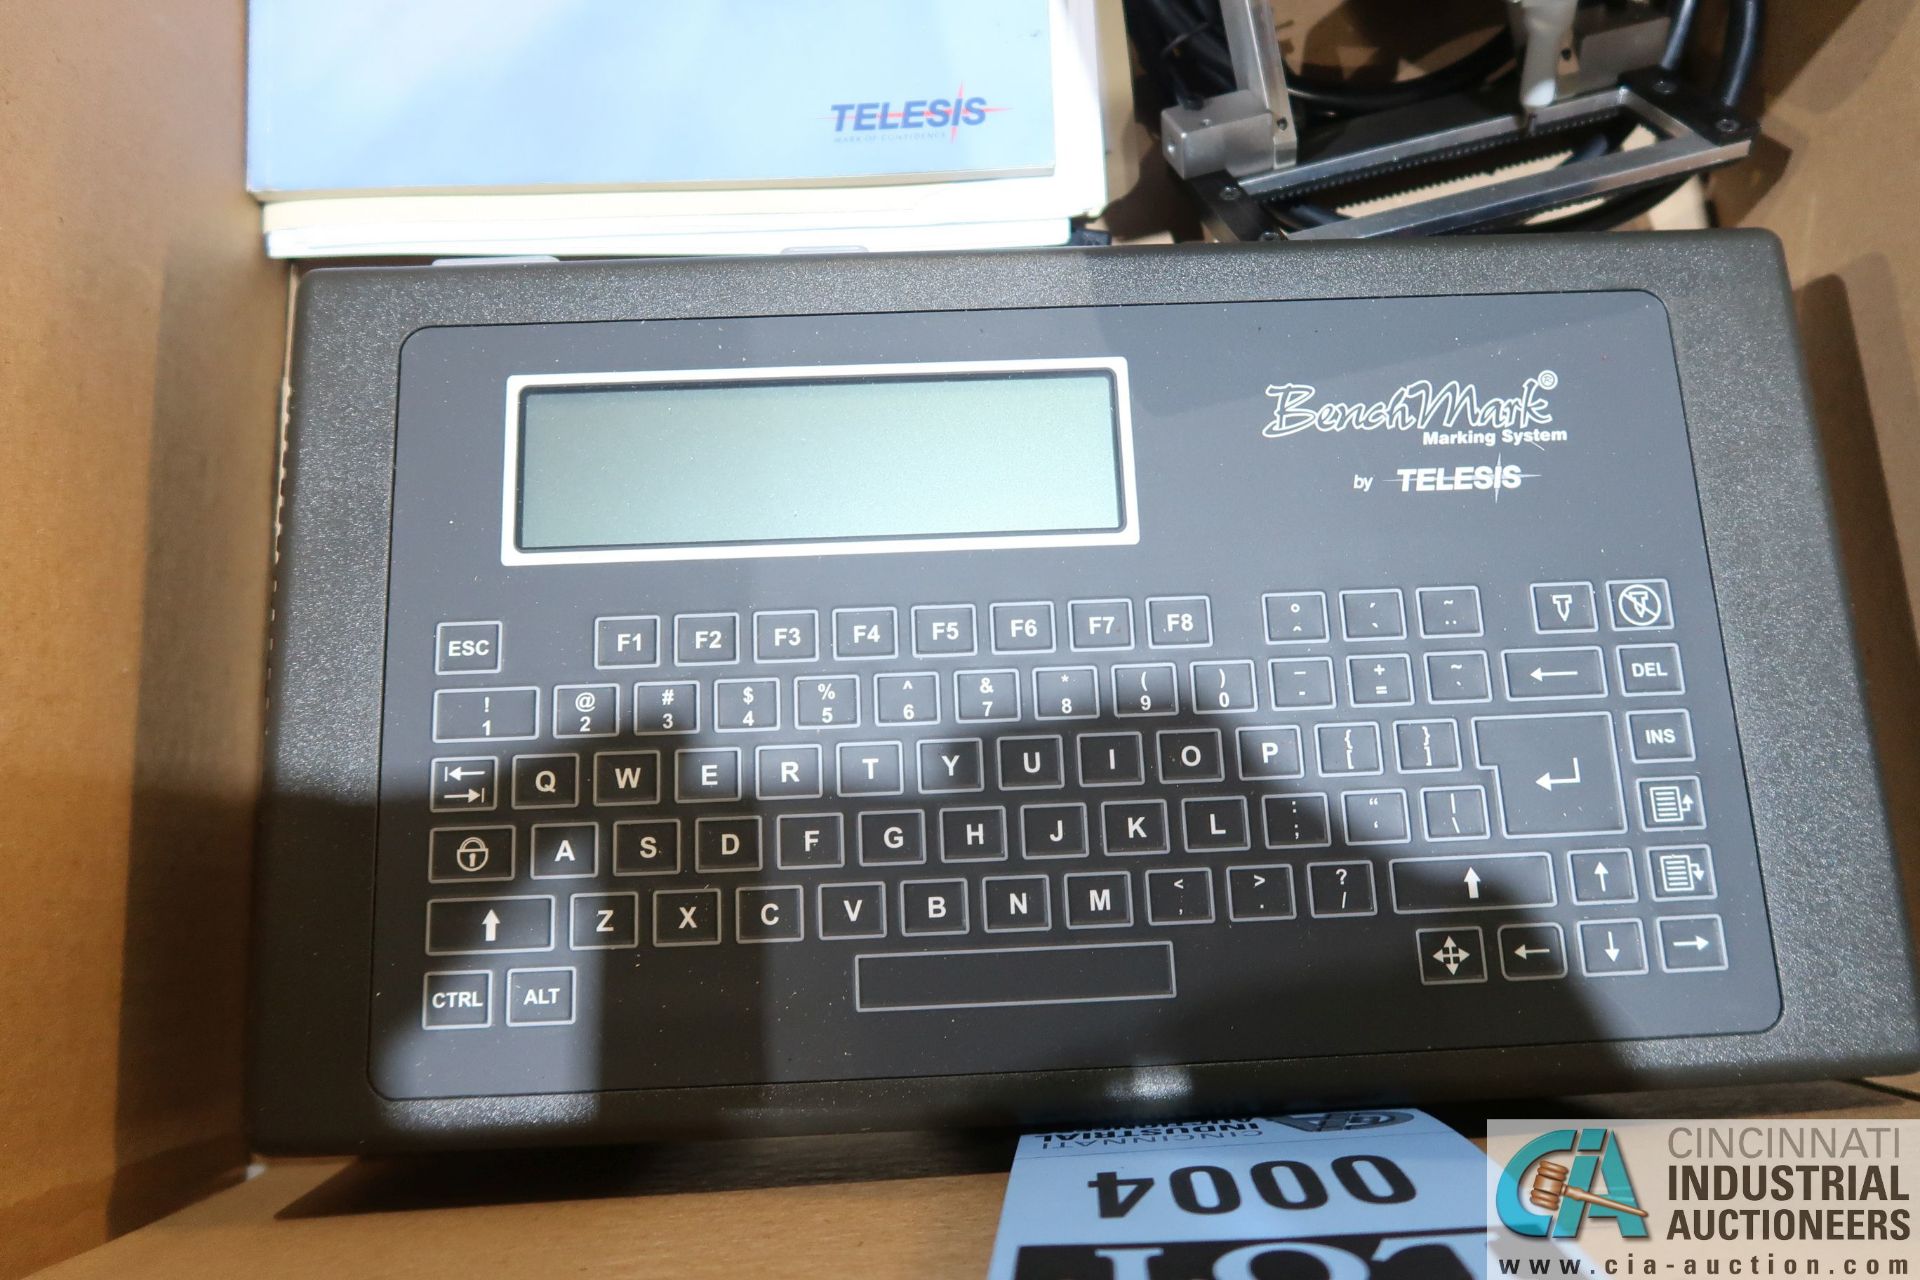 TELESIS BENCHMARK 460 HAND-HELD MARKING SYSTEM WITH CONTROLLER - Image 3 of 4